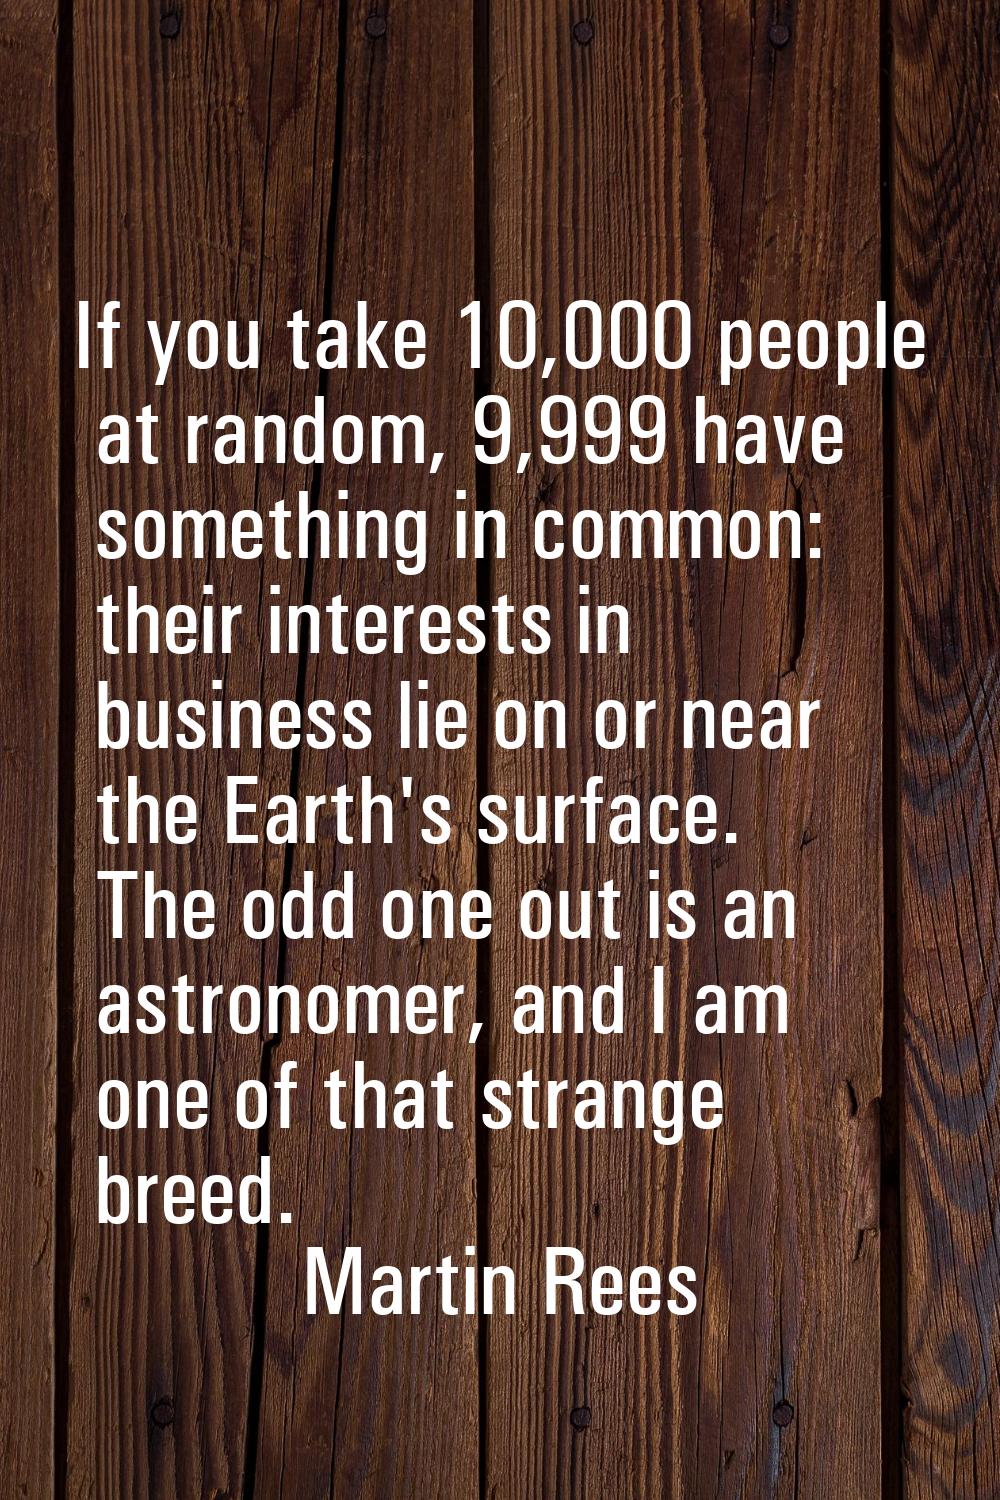 If you take 10,000 people at random, 9,999 have something in common: their interests in business li